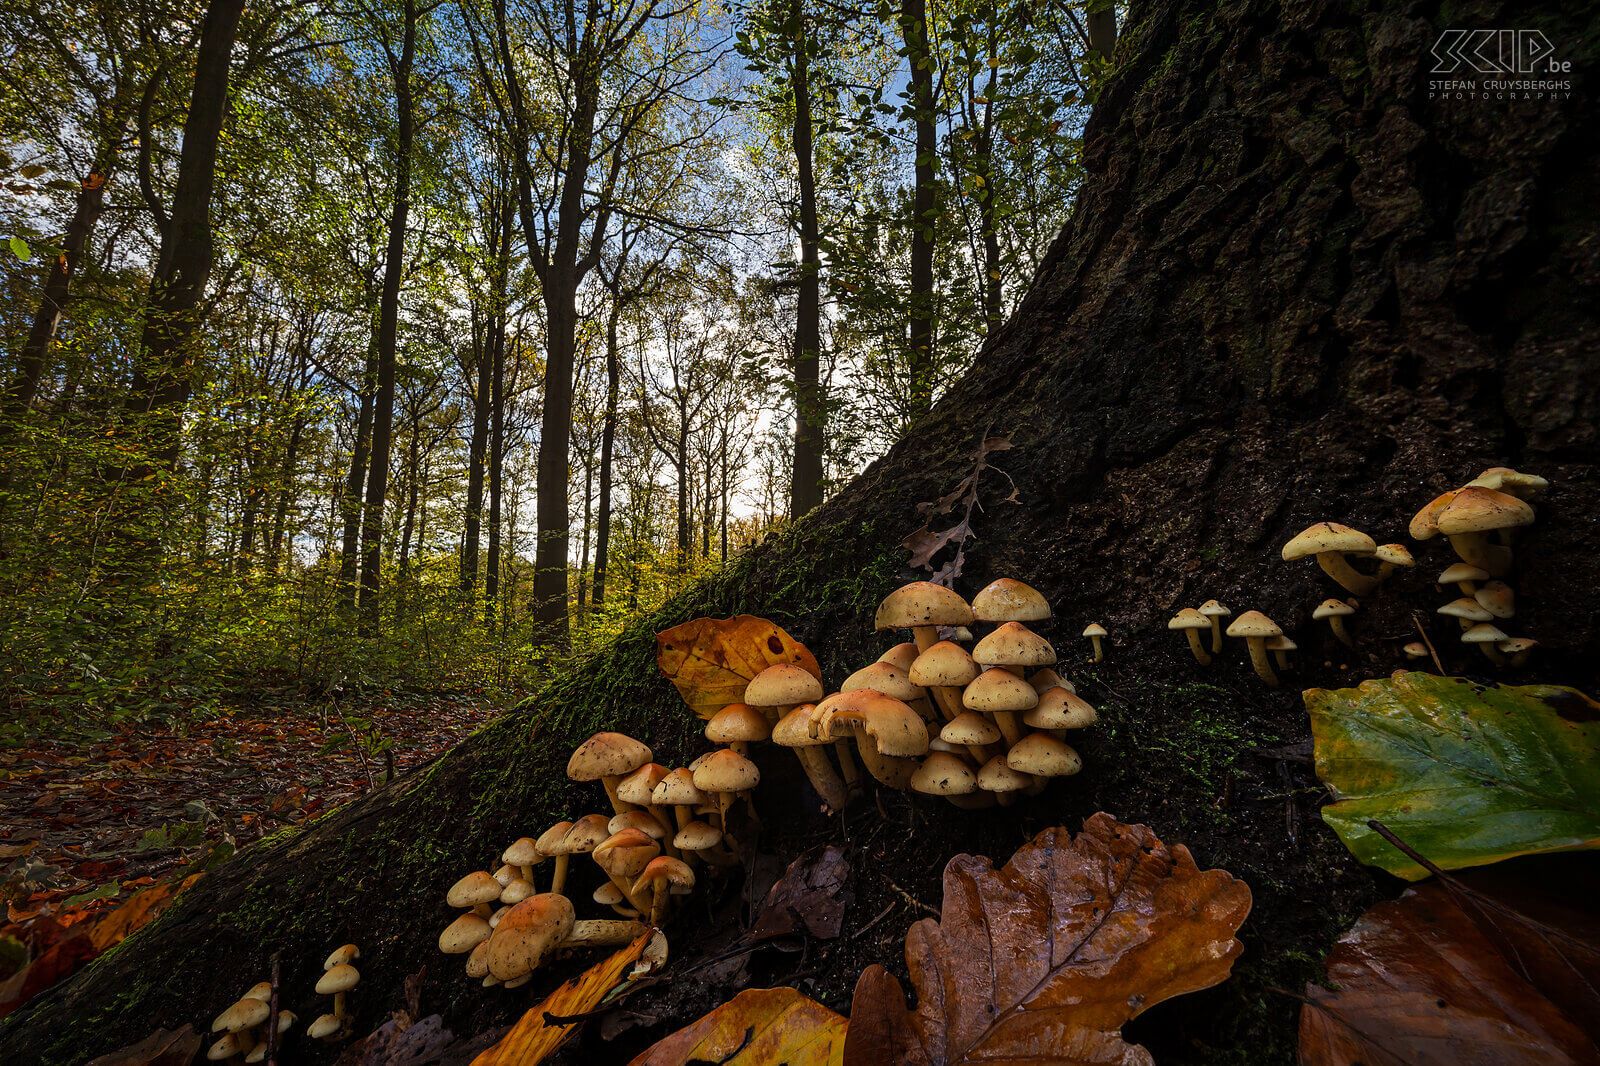 Mushrooms - Sulfur tuft This autumn many beautiful mushrooms and fungi appear again in our forests and gardens Stefan Cruysberghs